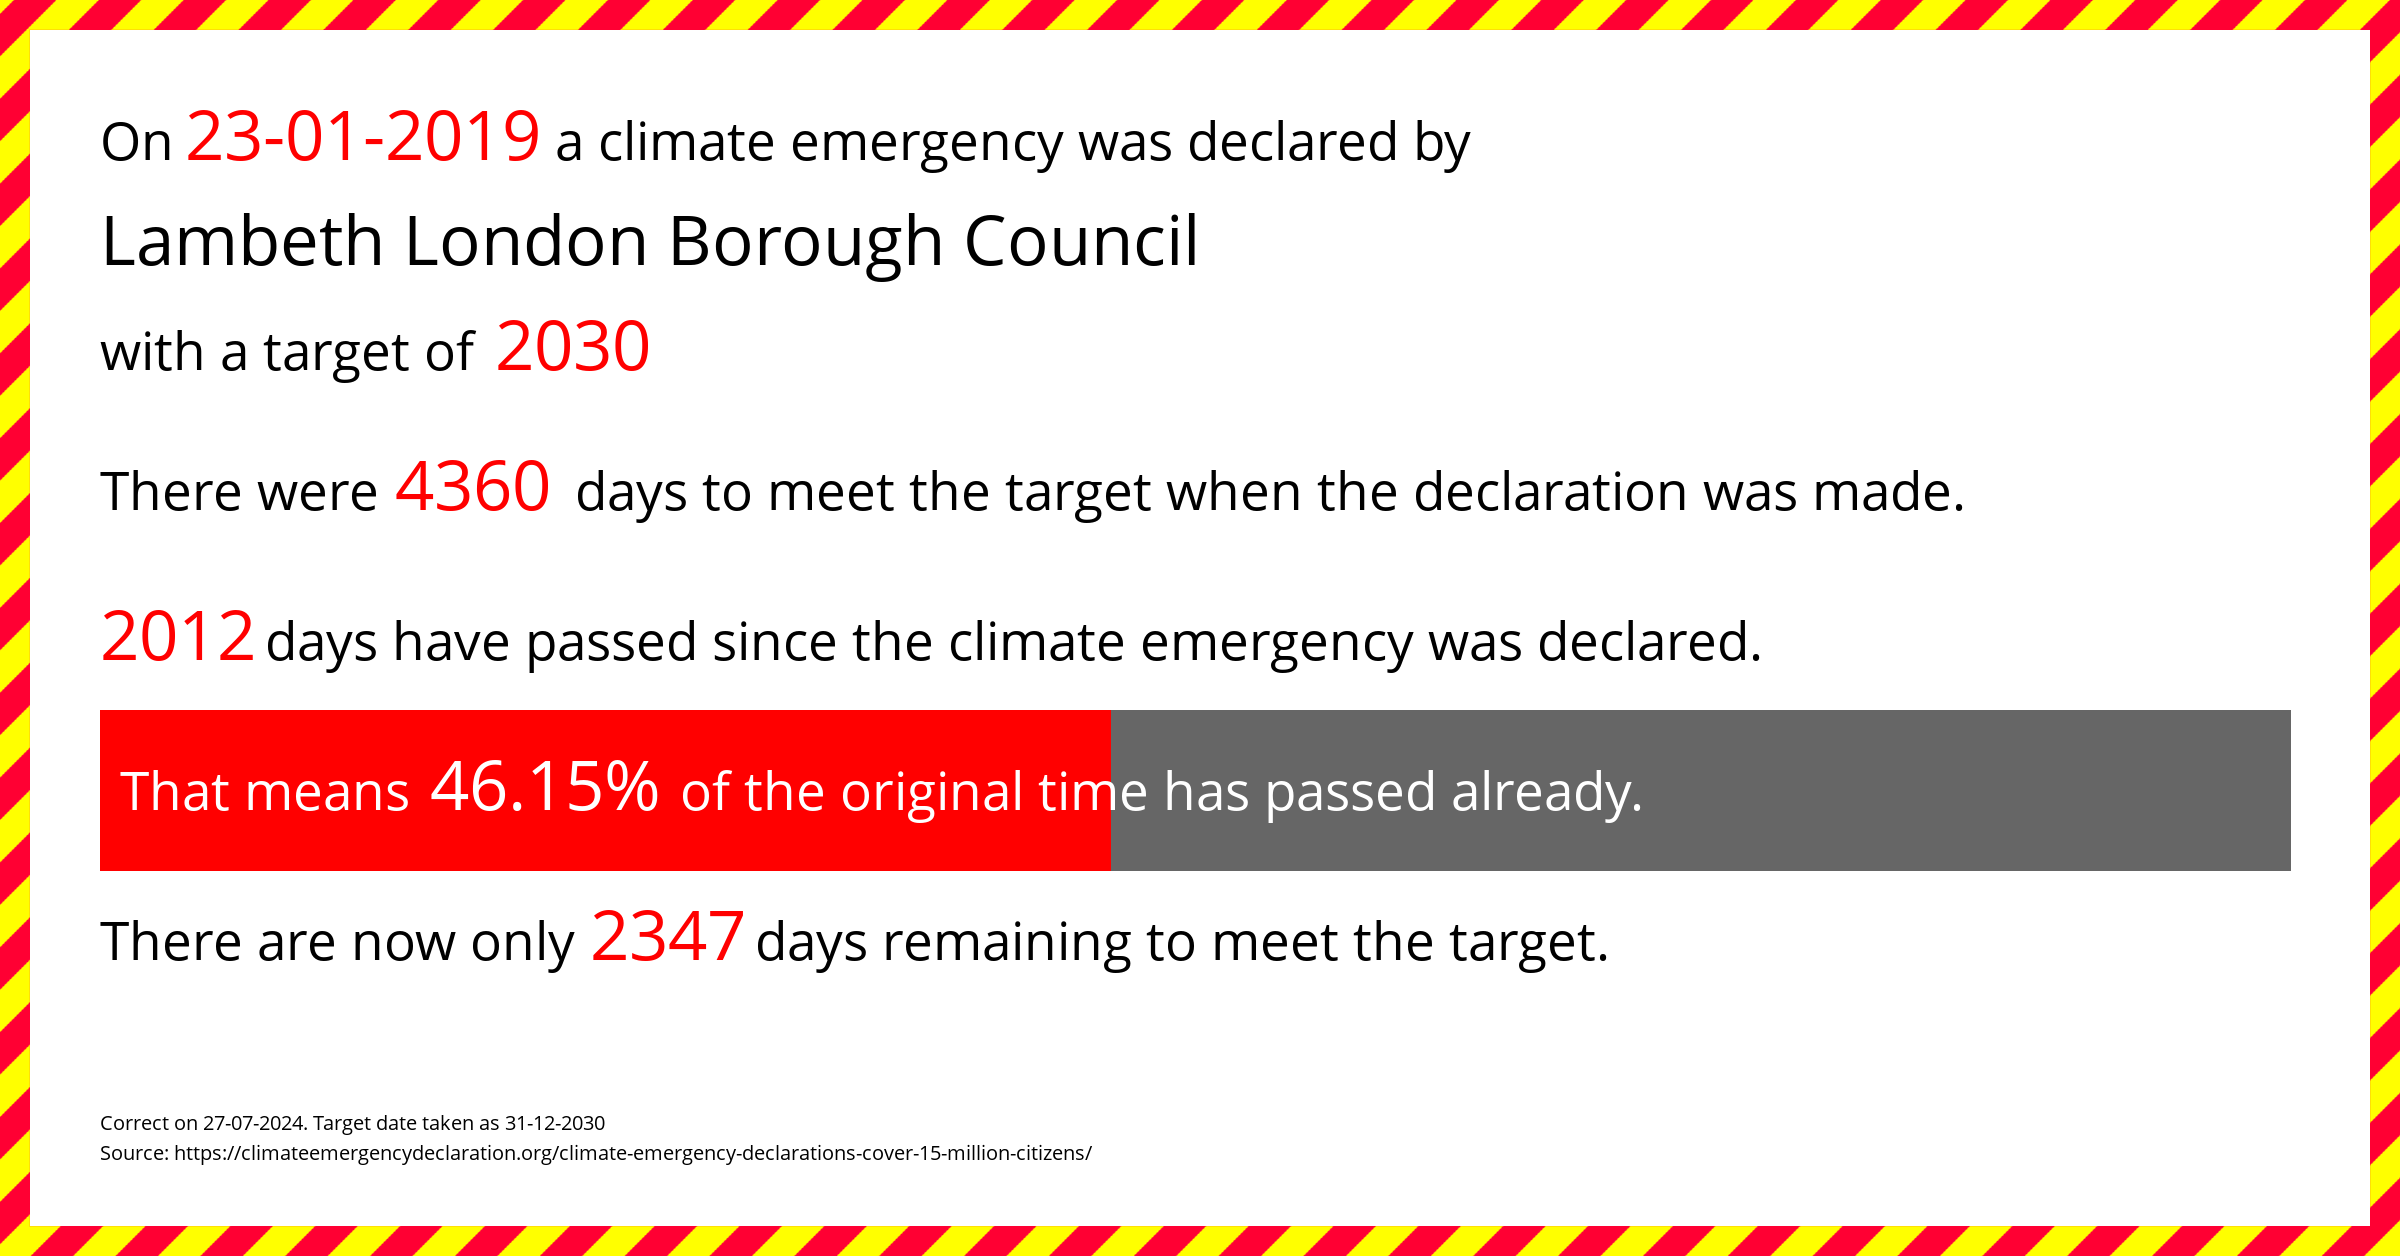 Lambeth London Borough Council declared a Climate emergency on Wednesday 23rd January 2019, with a target of 2030.